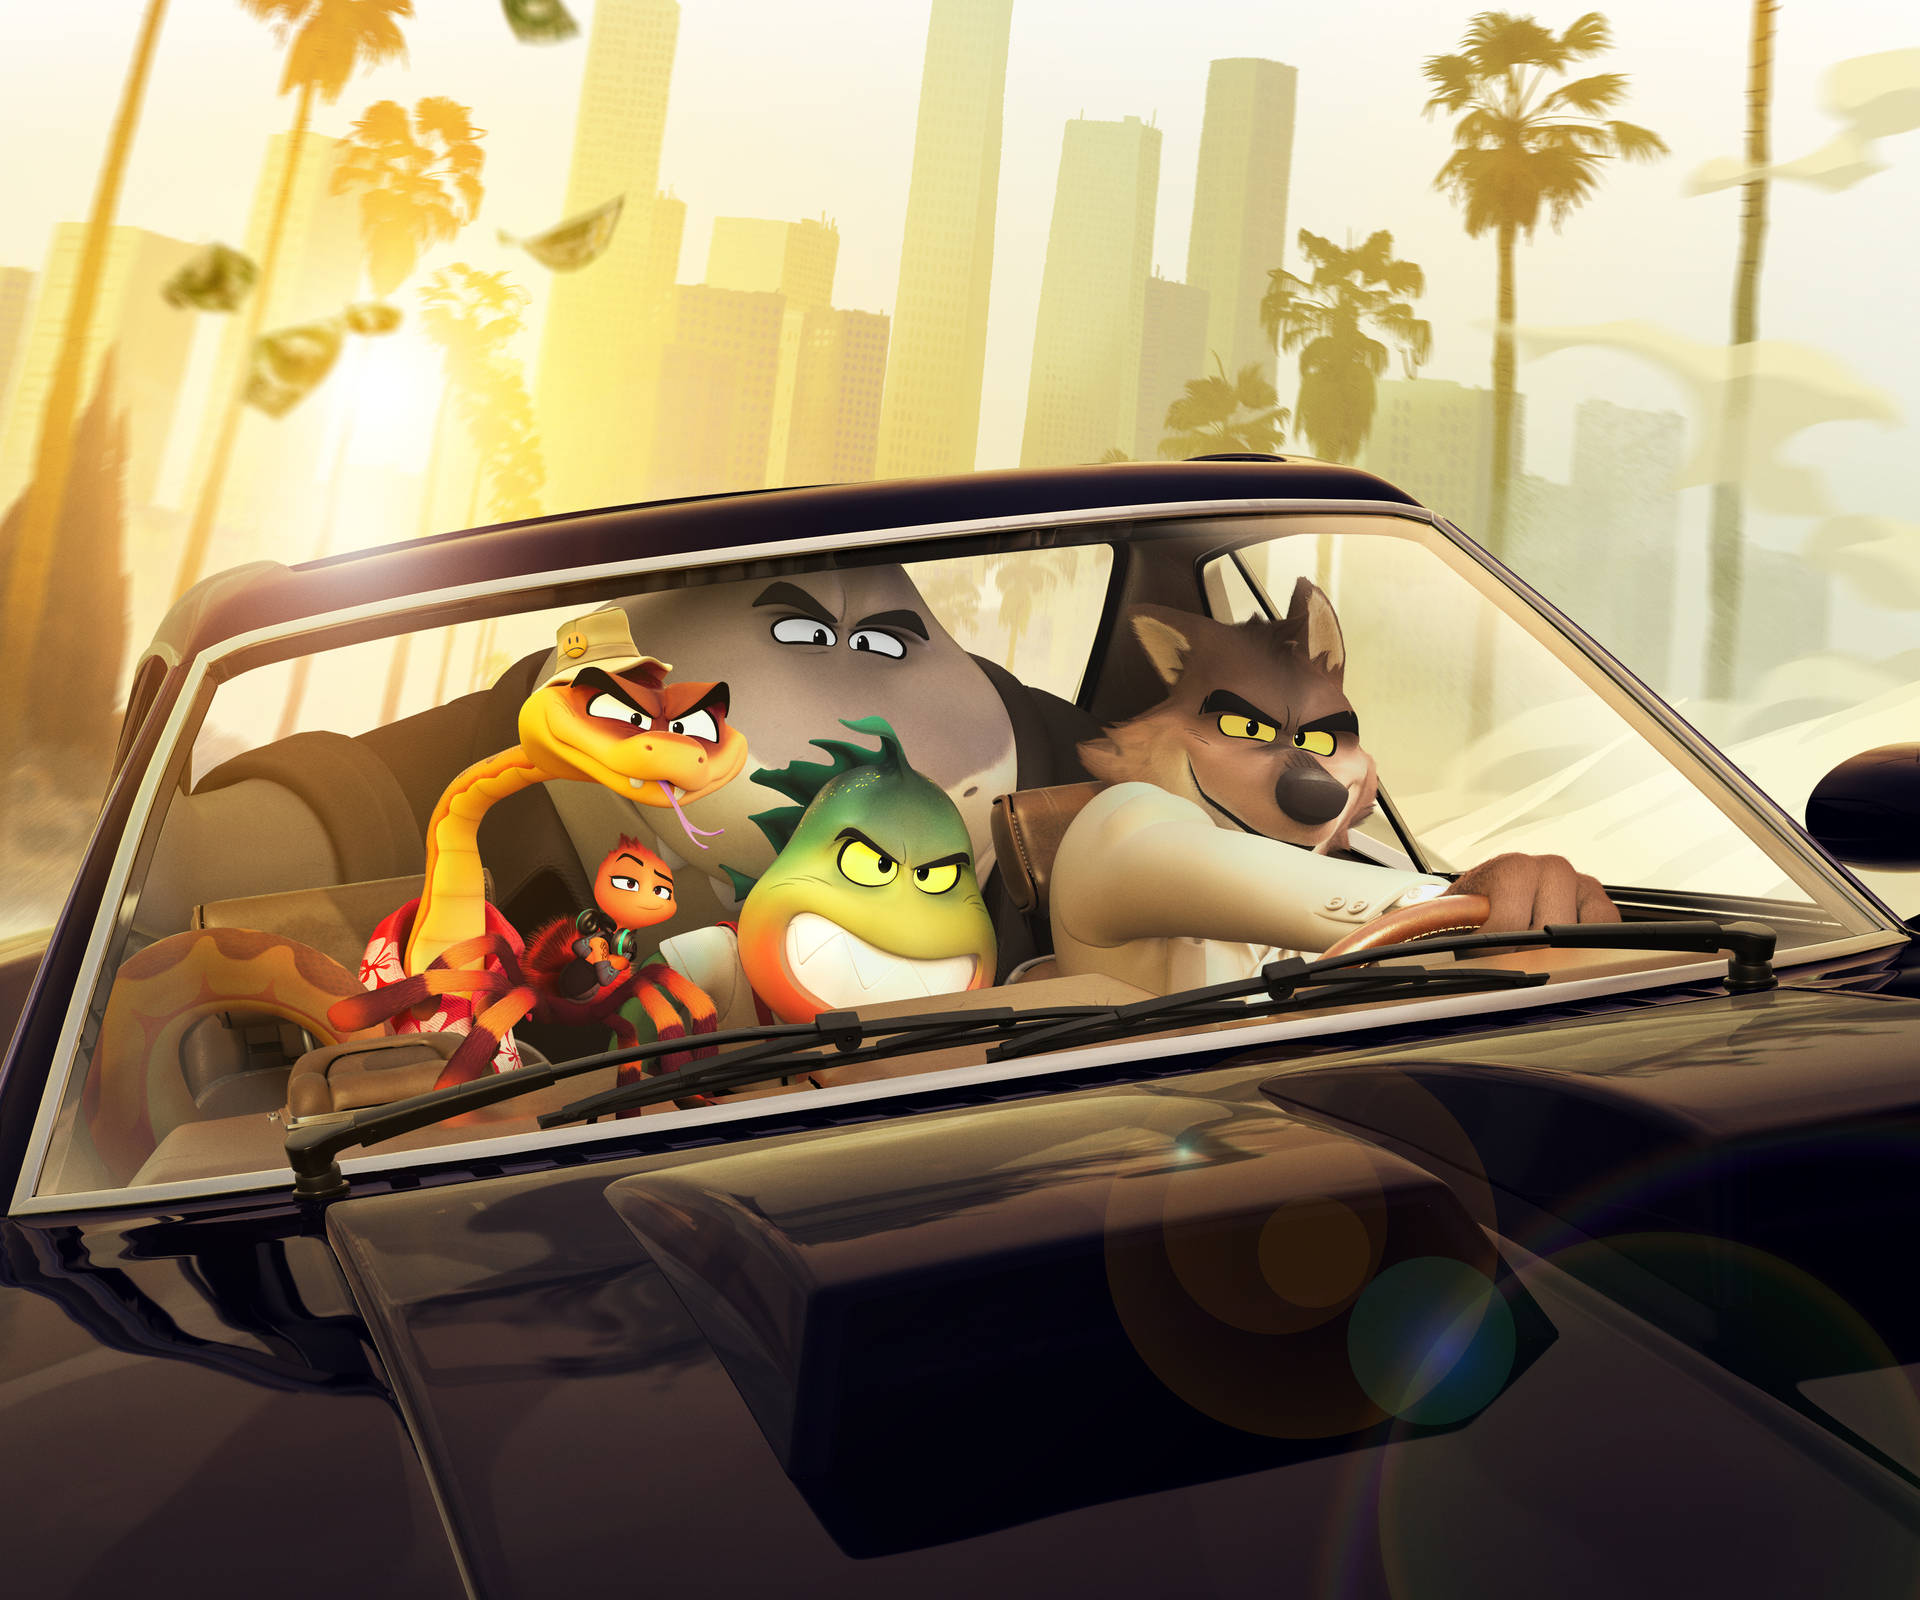 The Bad Guys In The Car Wallpaper